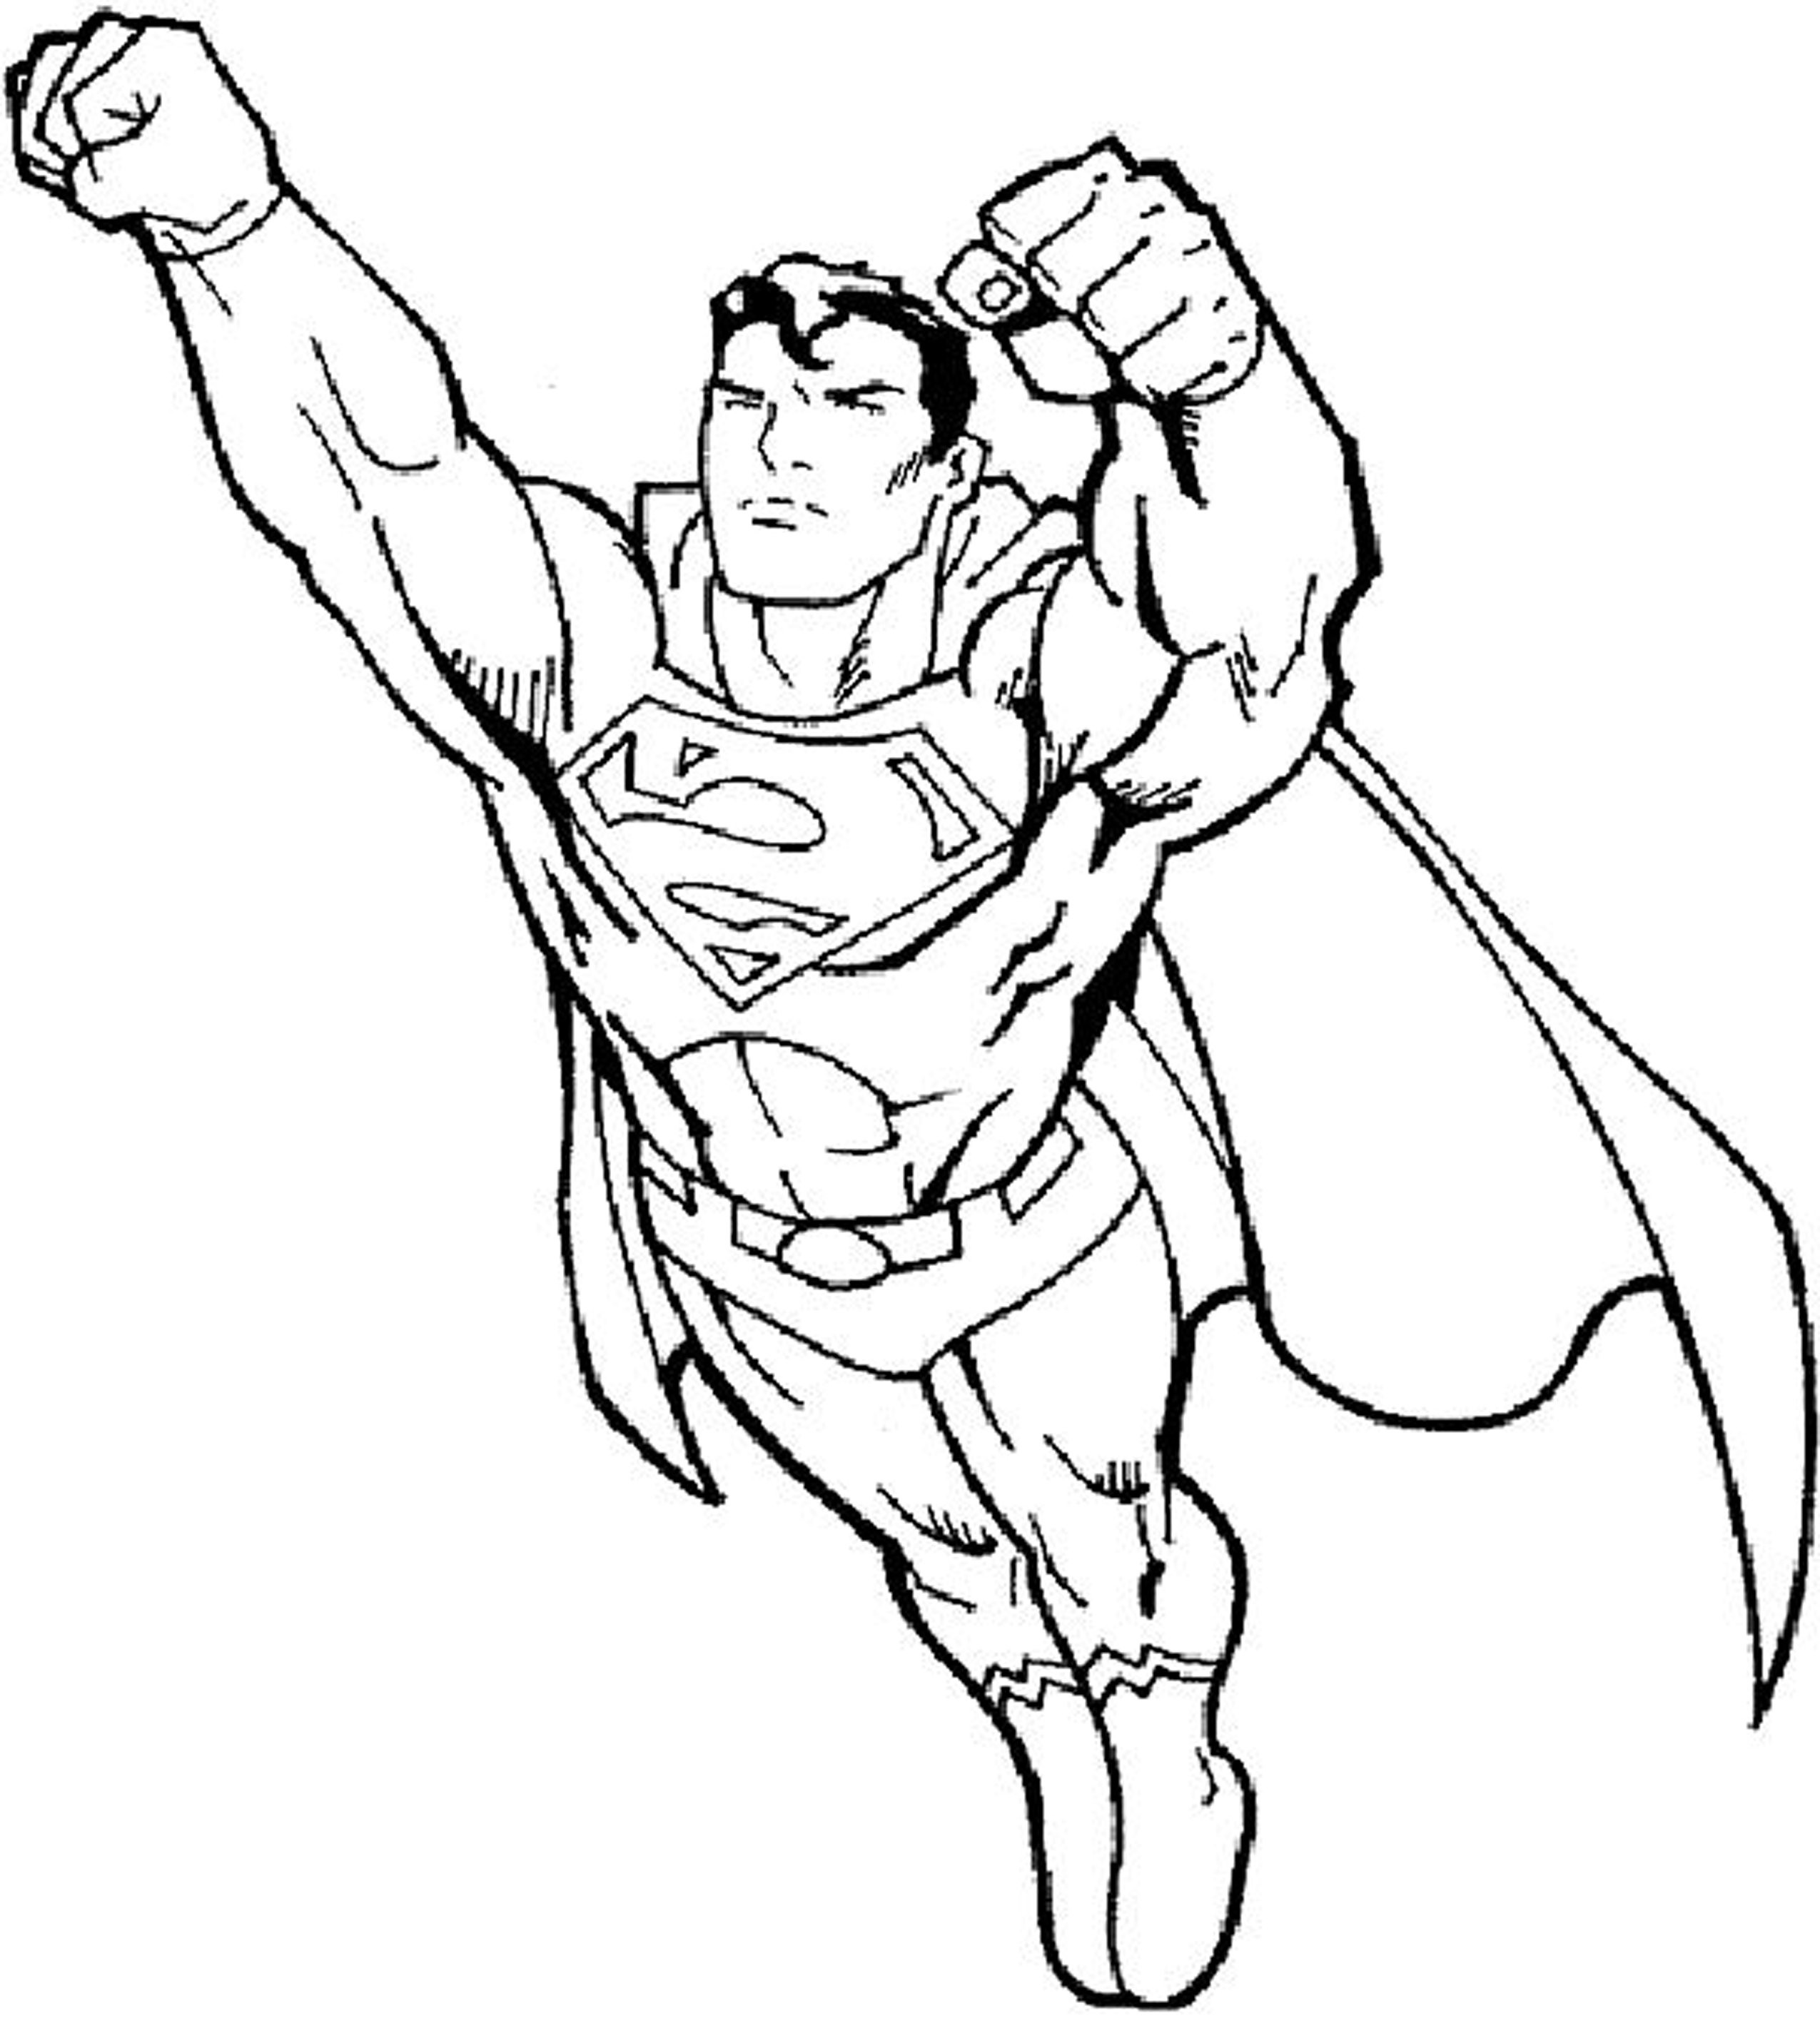 Free Printable Boys Coloring Pages
 Coloring Pages Free Printable Coloring Pages For Boys